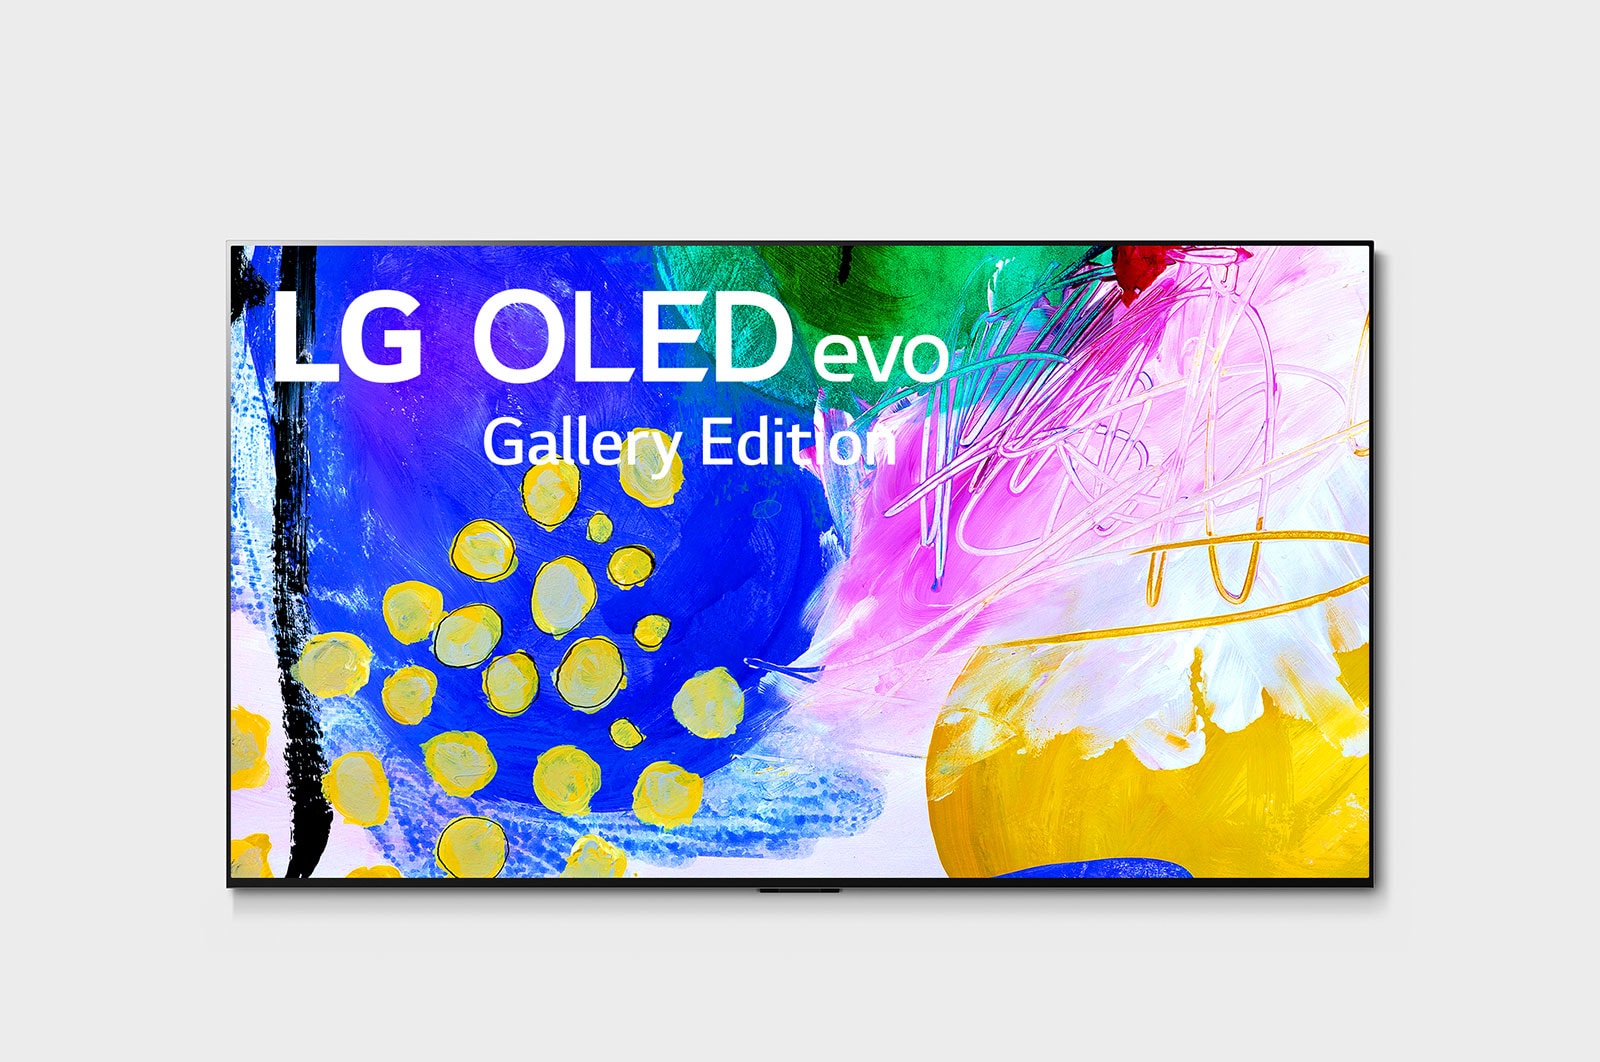 LG OLED evo TV 65 Inch G2 Series, Gallery Design, flush-fit wall mount ,4K Cinema HDR webOS Smart ThinQ AI Pixel Dimming - OLED65G26LA